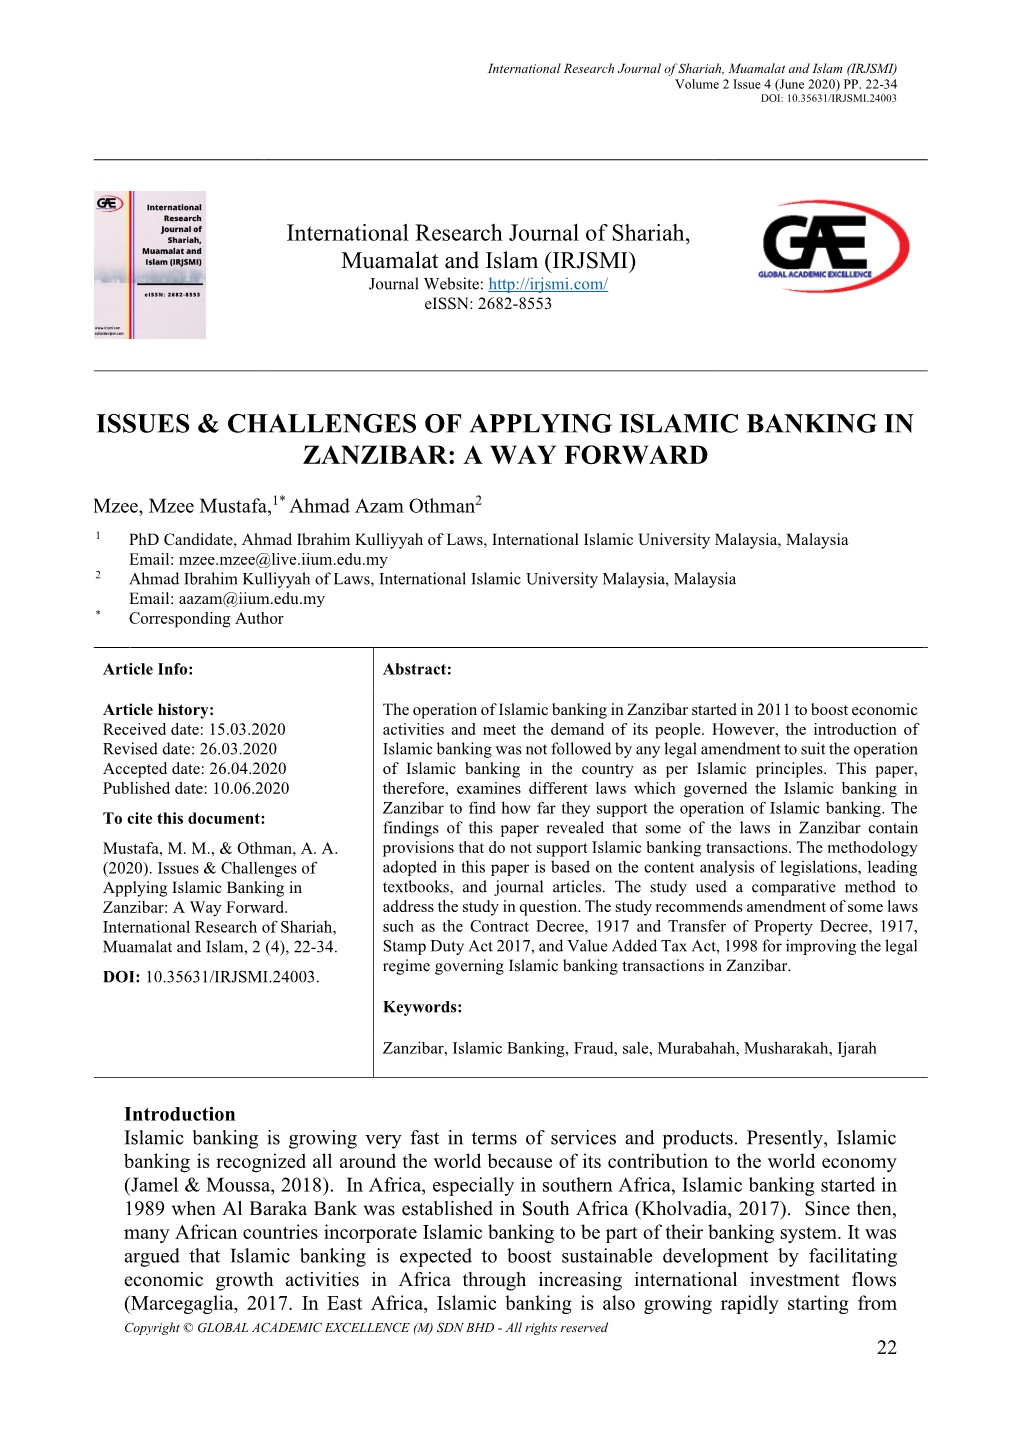 Issues & Challenges of Applying Islamic Banking In